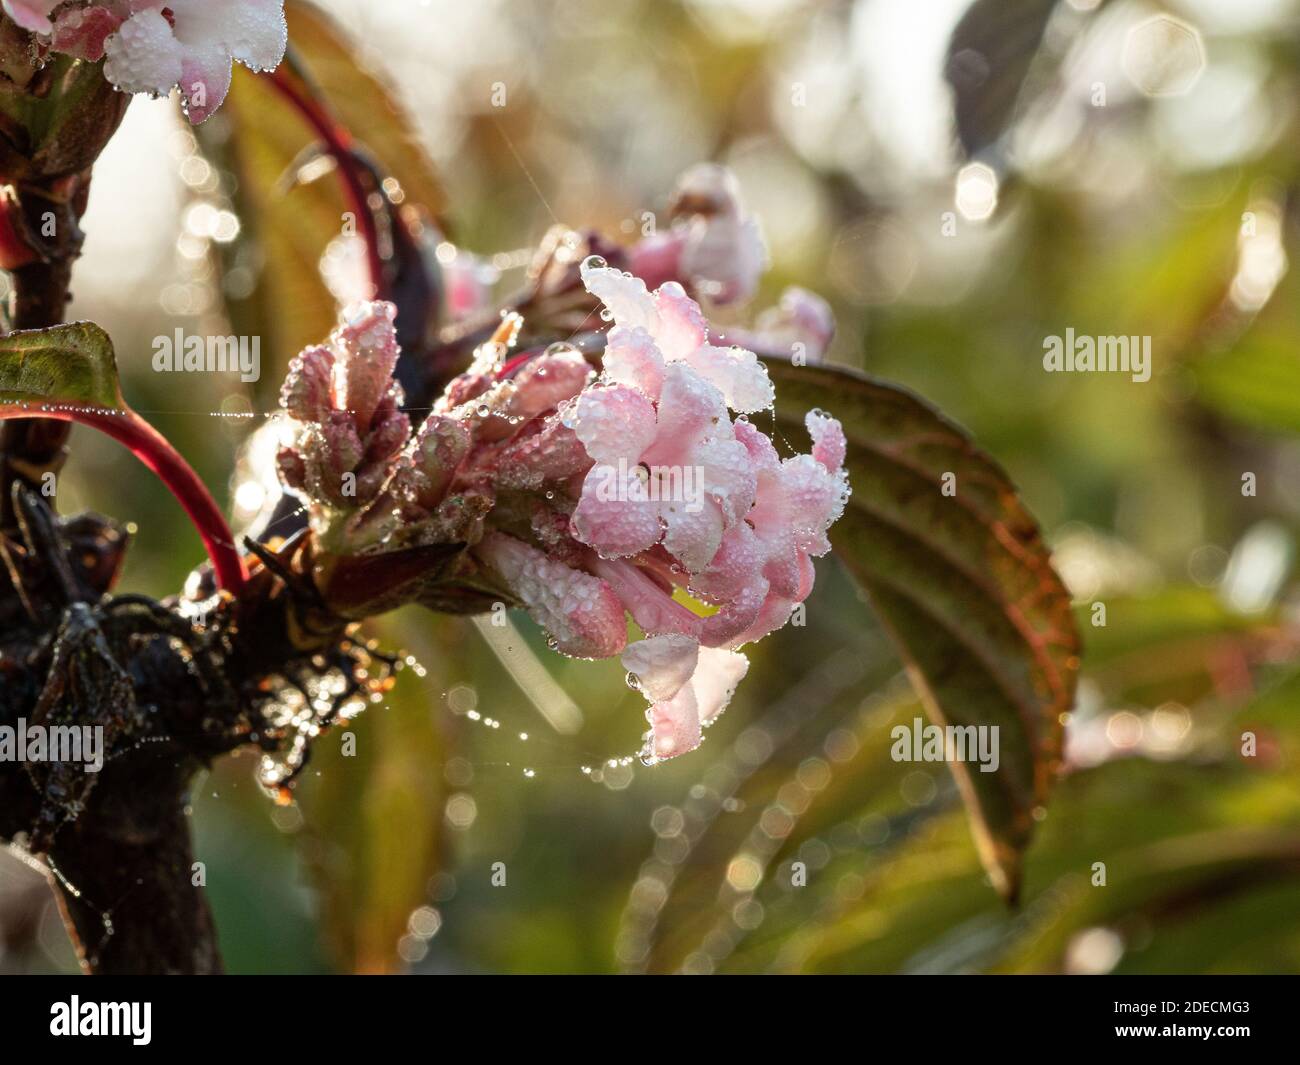 A close up of the pale pink flowers of Viburnum x bodnantense 'Dawn covered in sunlit dewdrops. Stock Photo